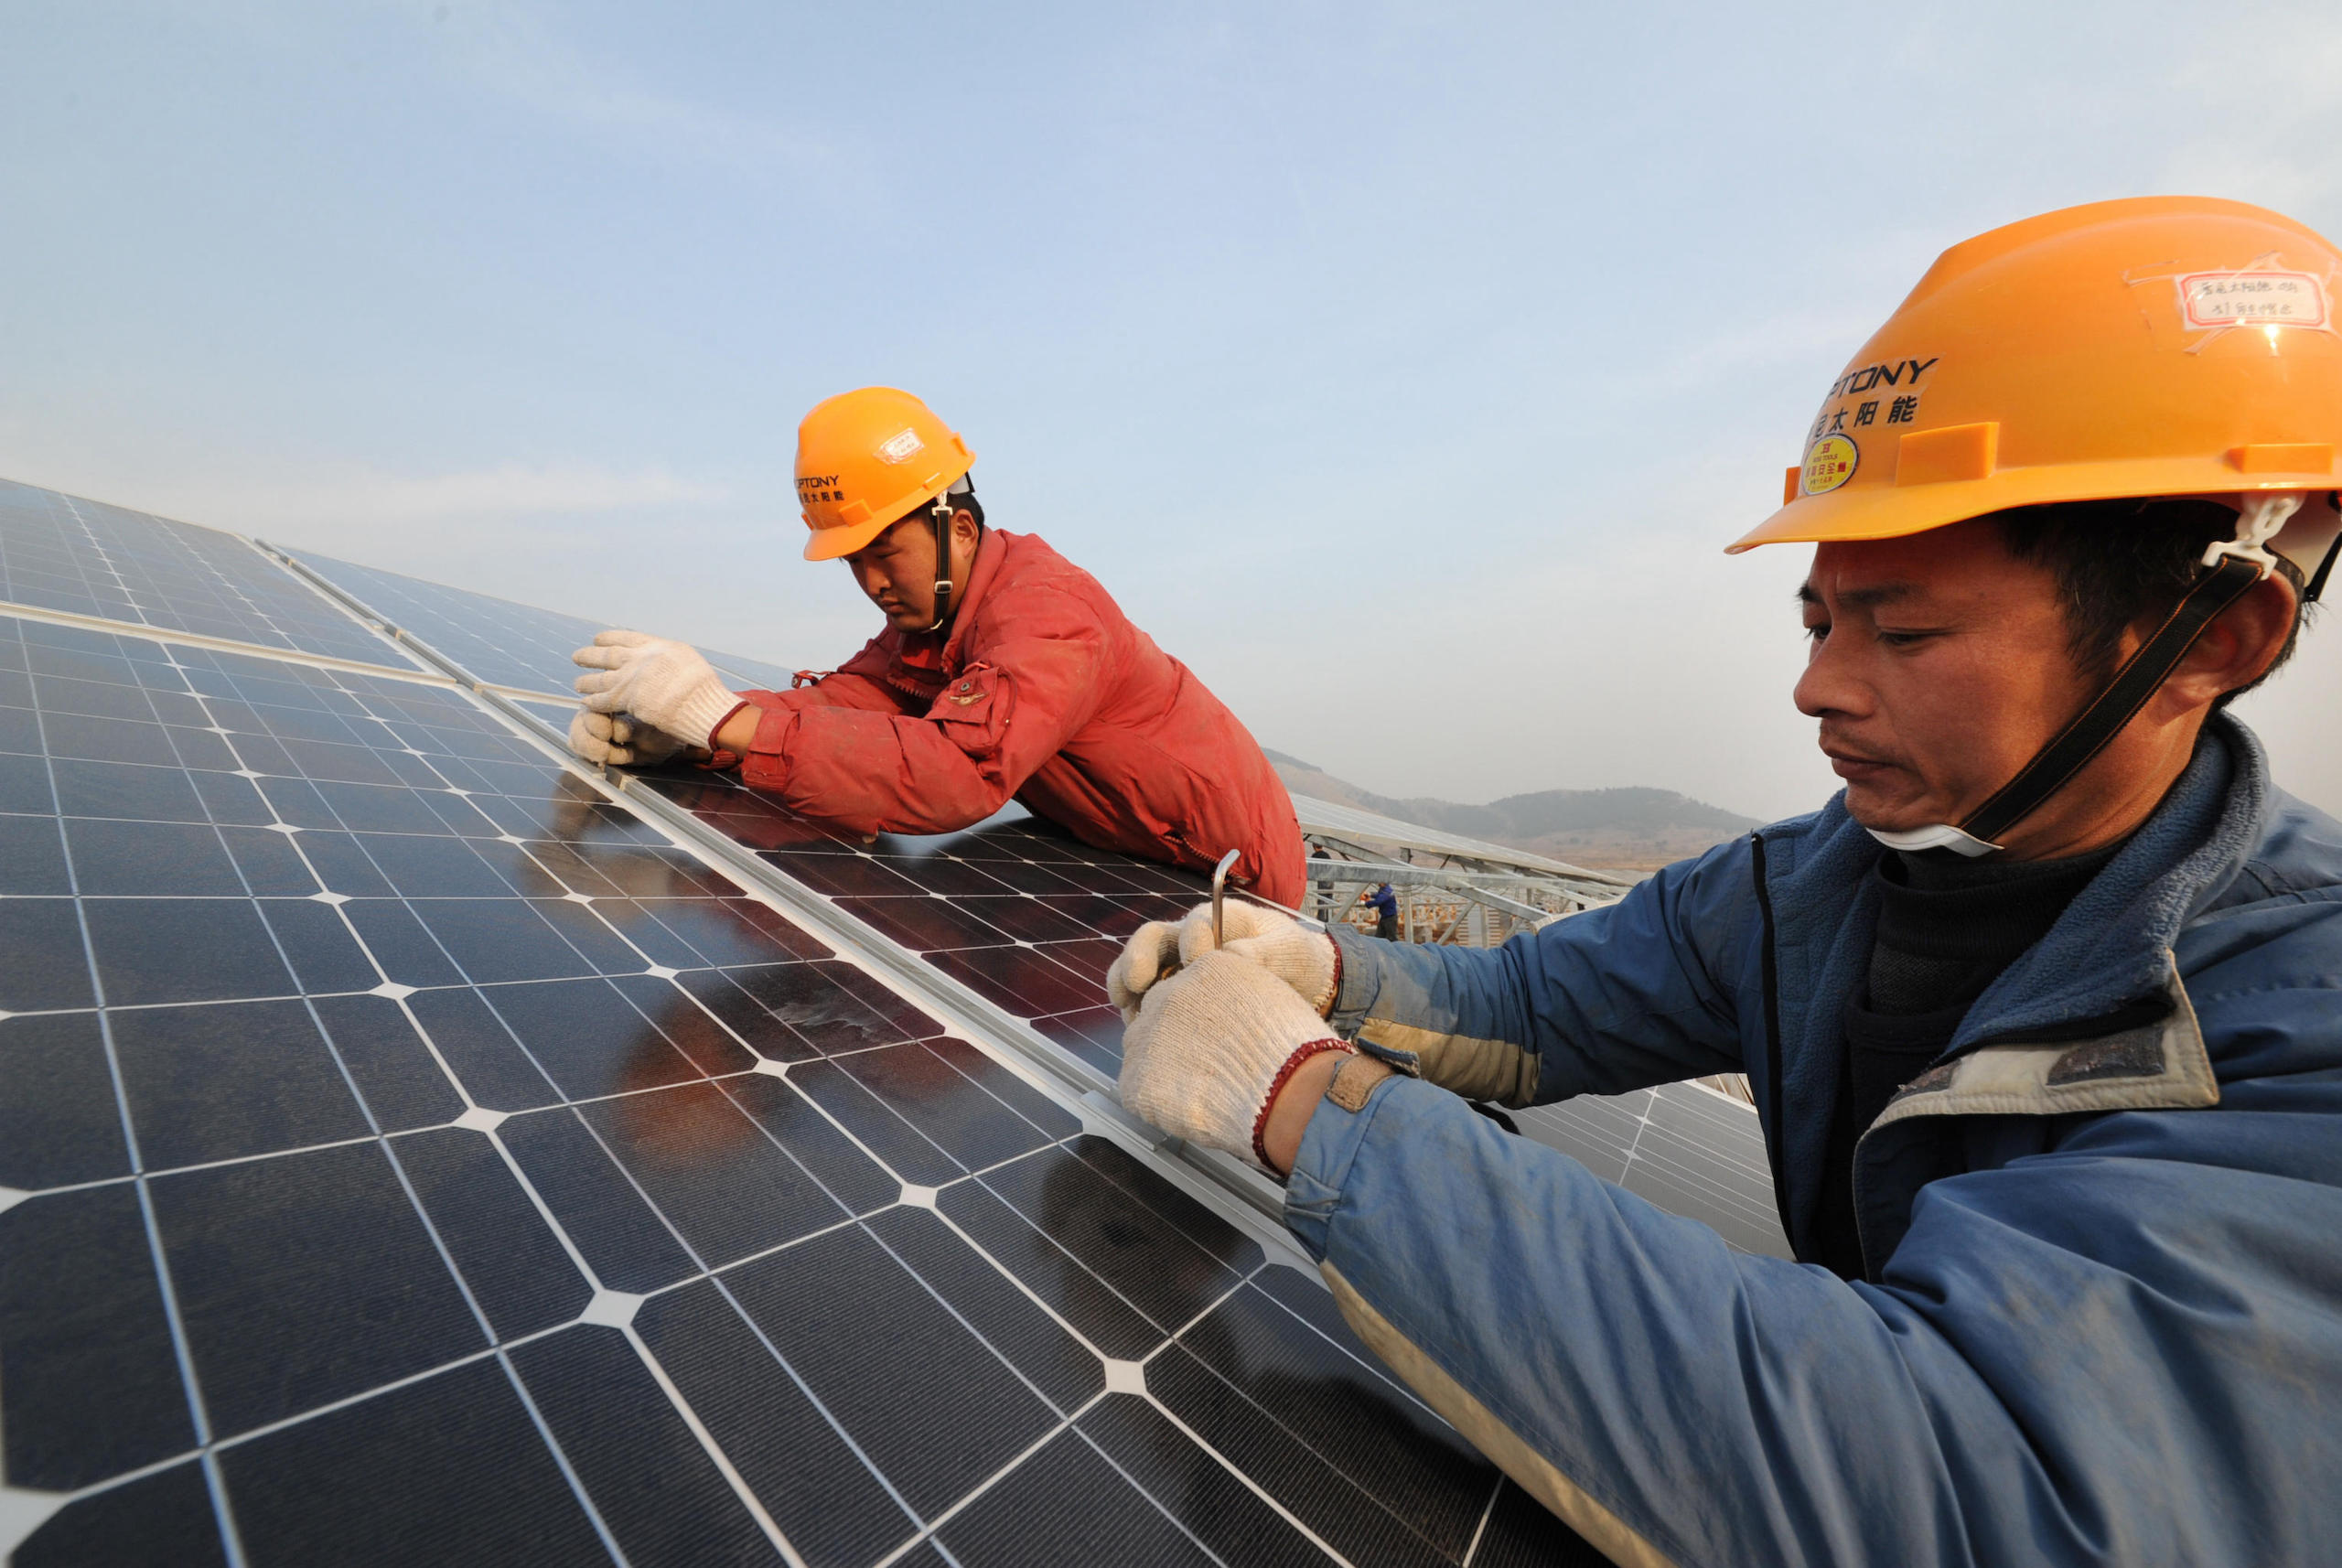 Chinese workers install solar panels at a photovoltaic (PV) power plant in Xiji town, Zaozhuang city